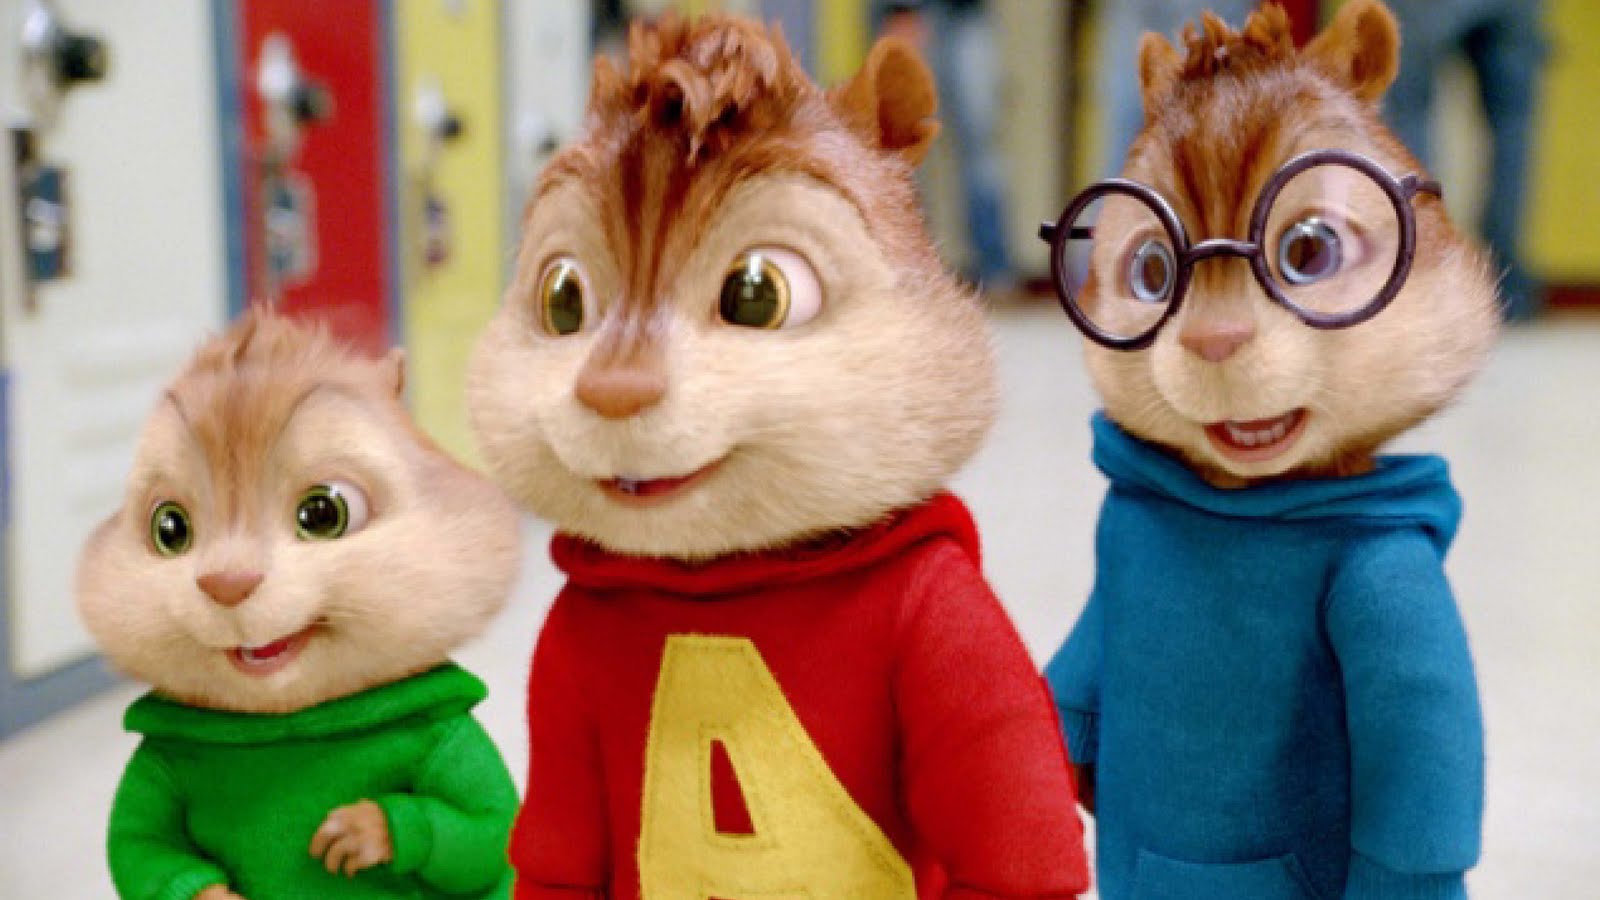 [Alvin+and+the+Chipmunks+Angry+Charlie+Reviews.jpg]